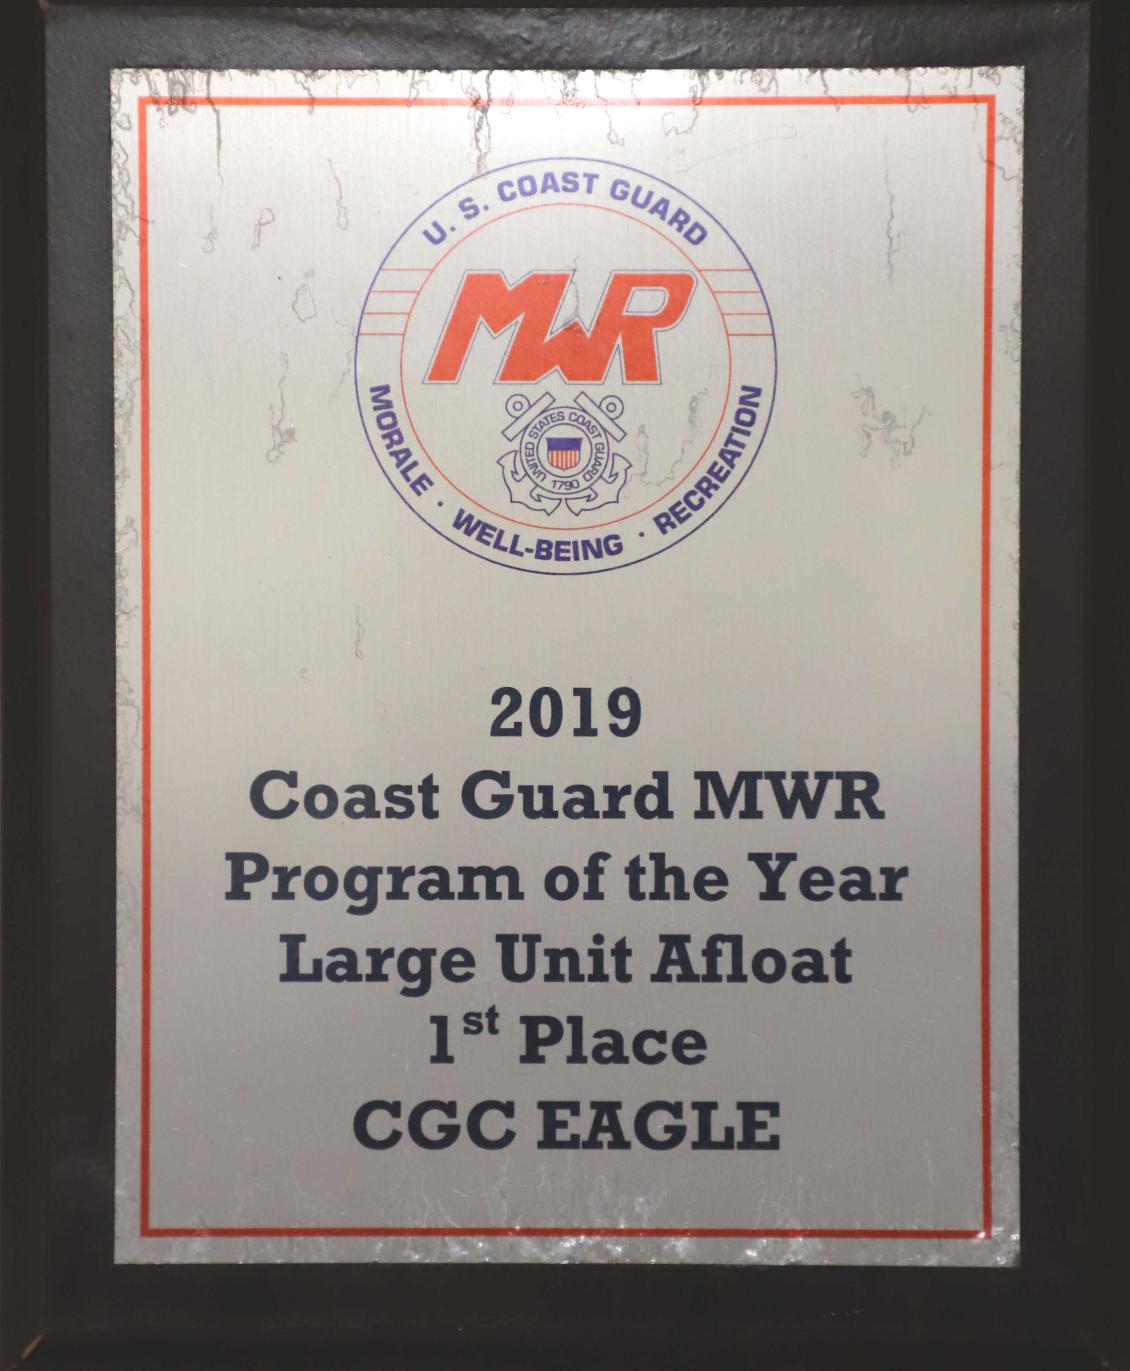 Coast Guard Cutter Eagle - Morale - Well Being - Recreation Award 2019